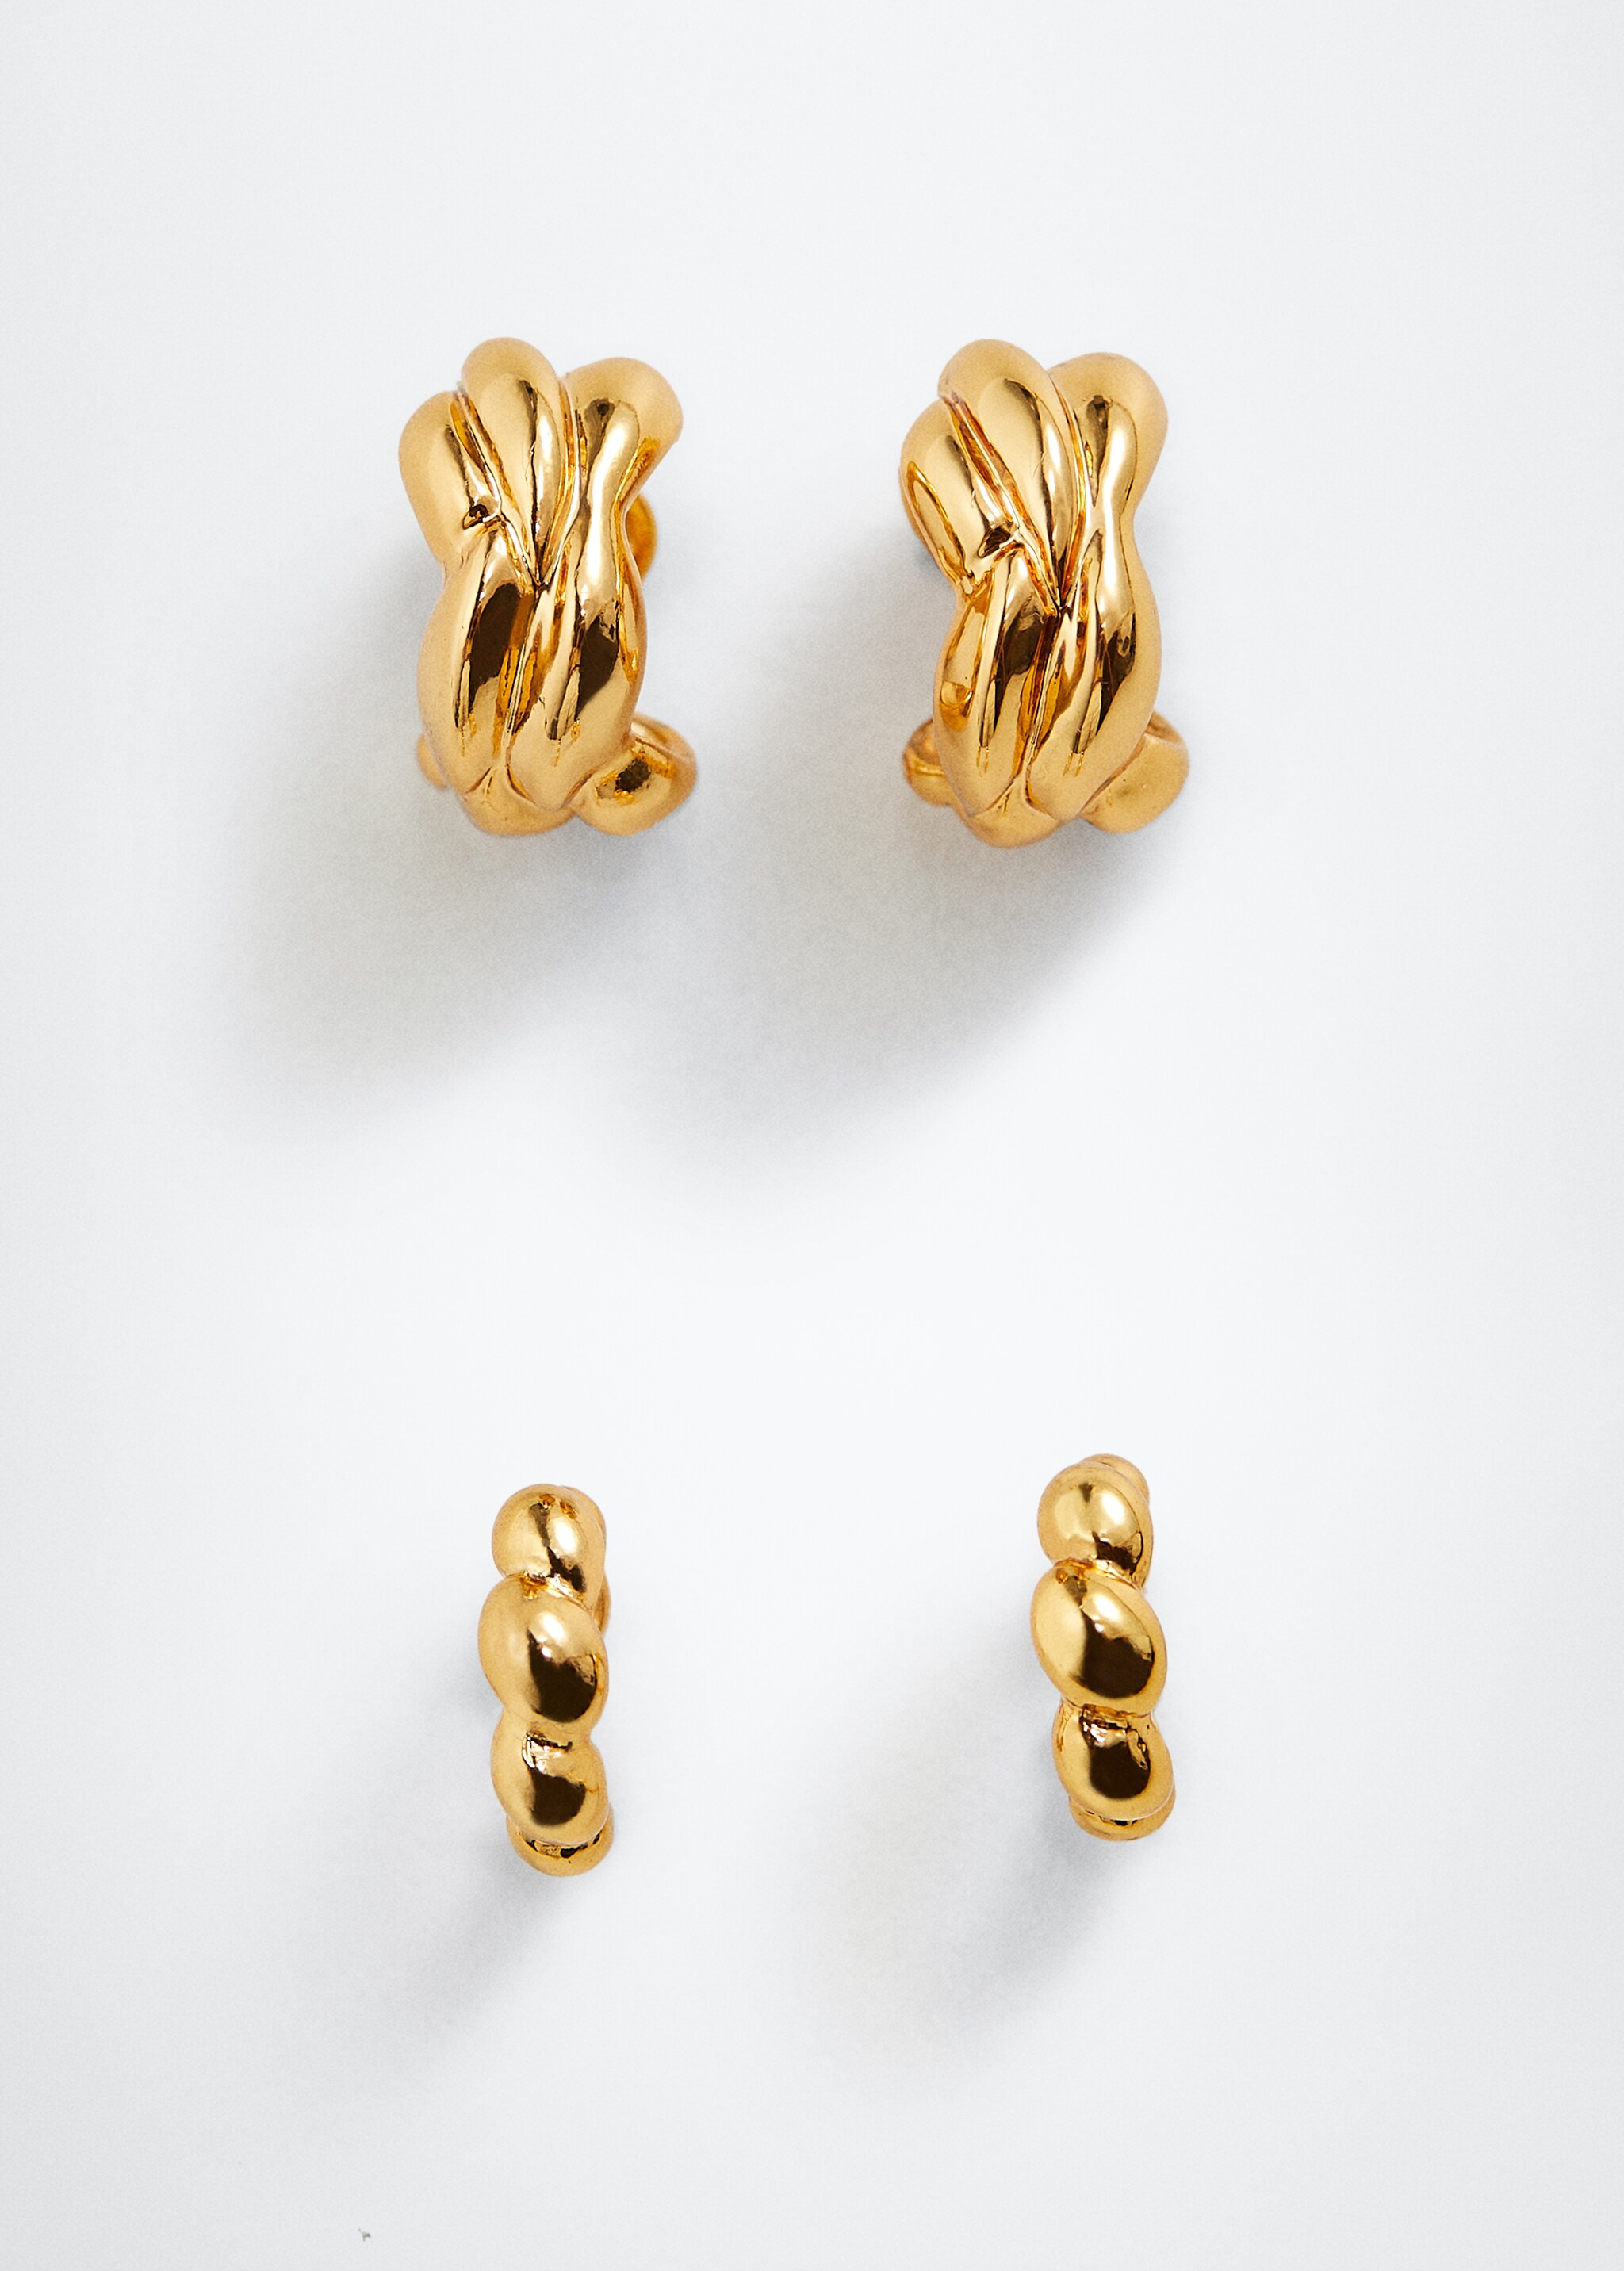 Ear cuff and earring set - Article without model